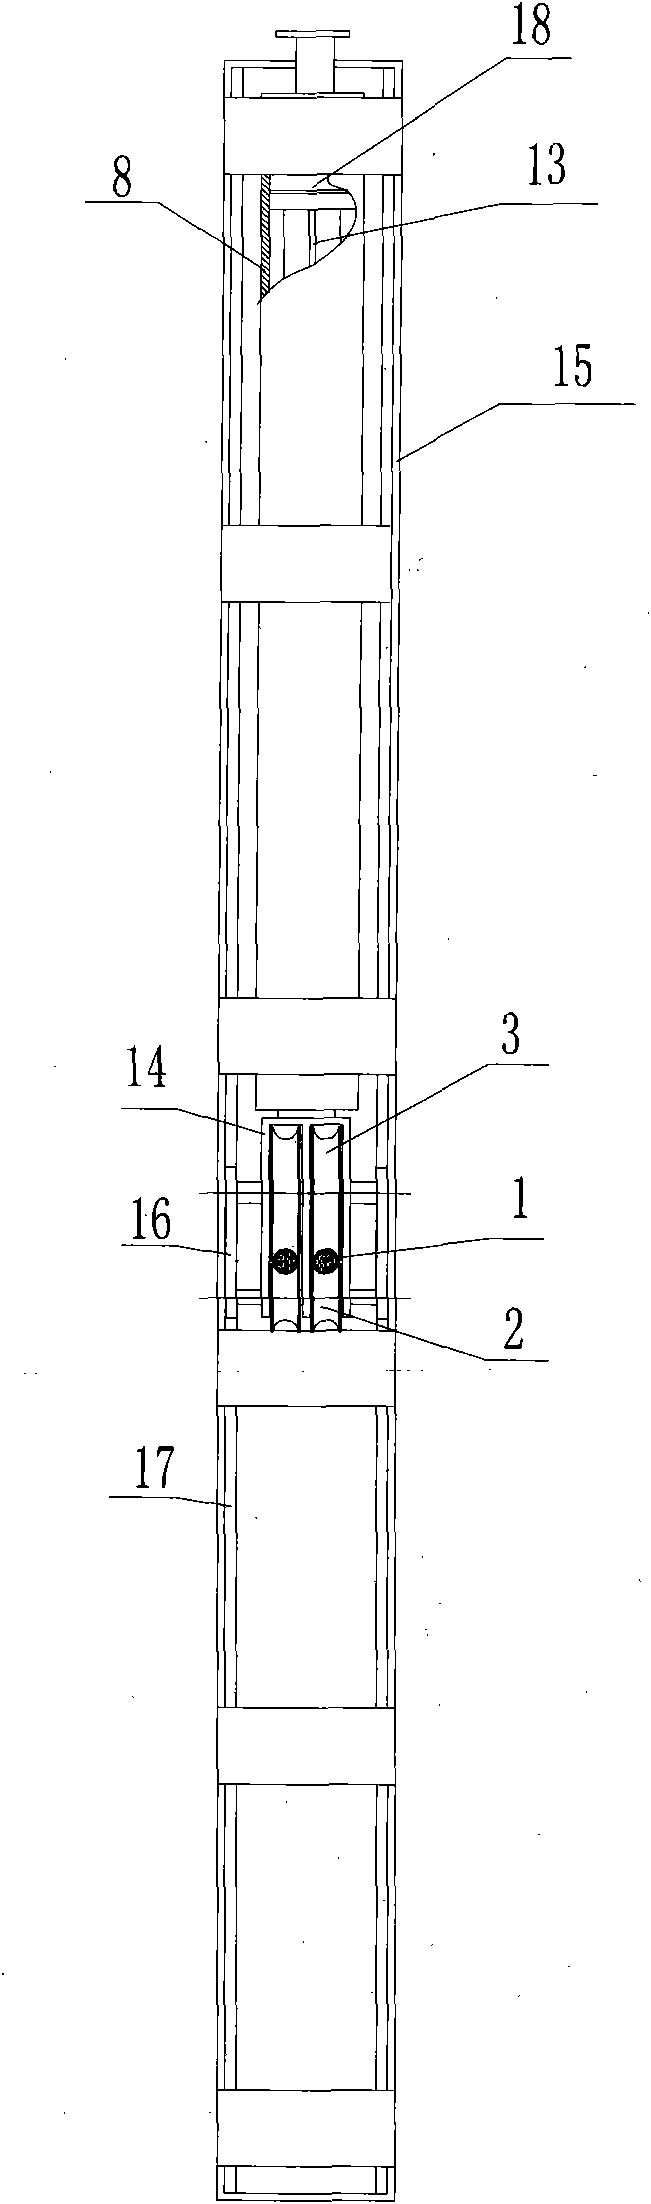 Large-thrust multiple acceleration type pneumatic ejector for carrier-based airplanes of airplane carrier